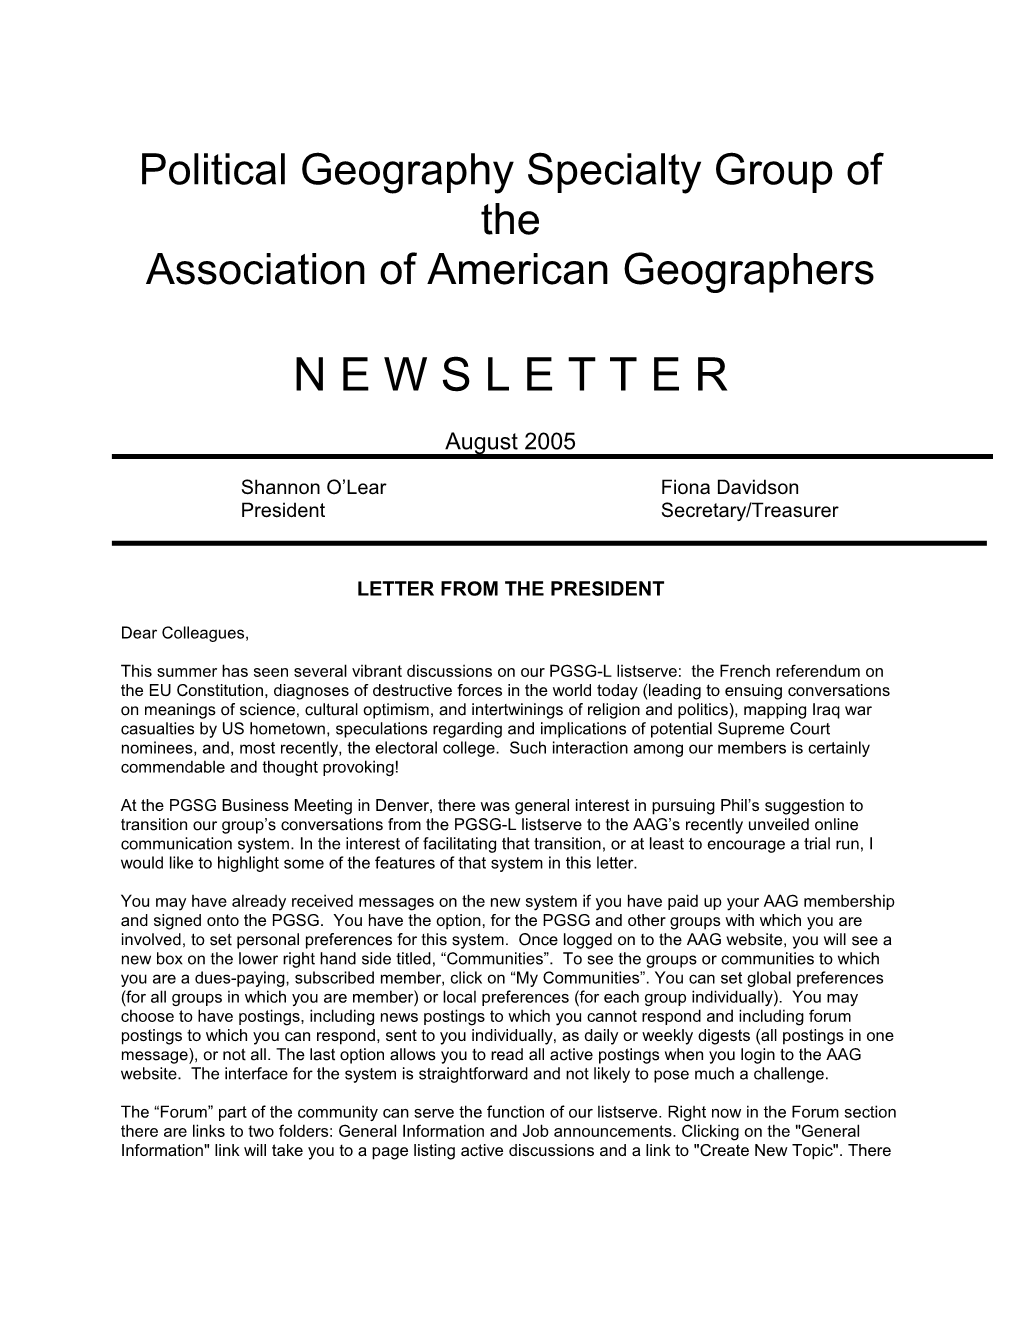 Political Geography Specialty Group of The